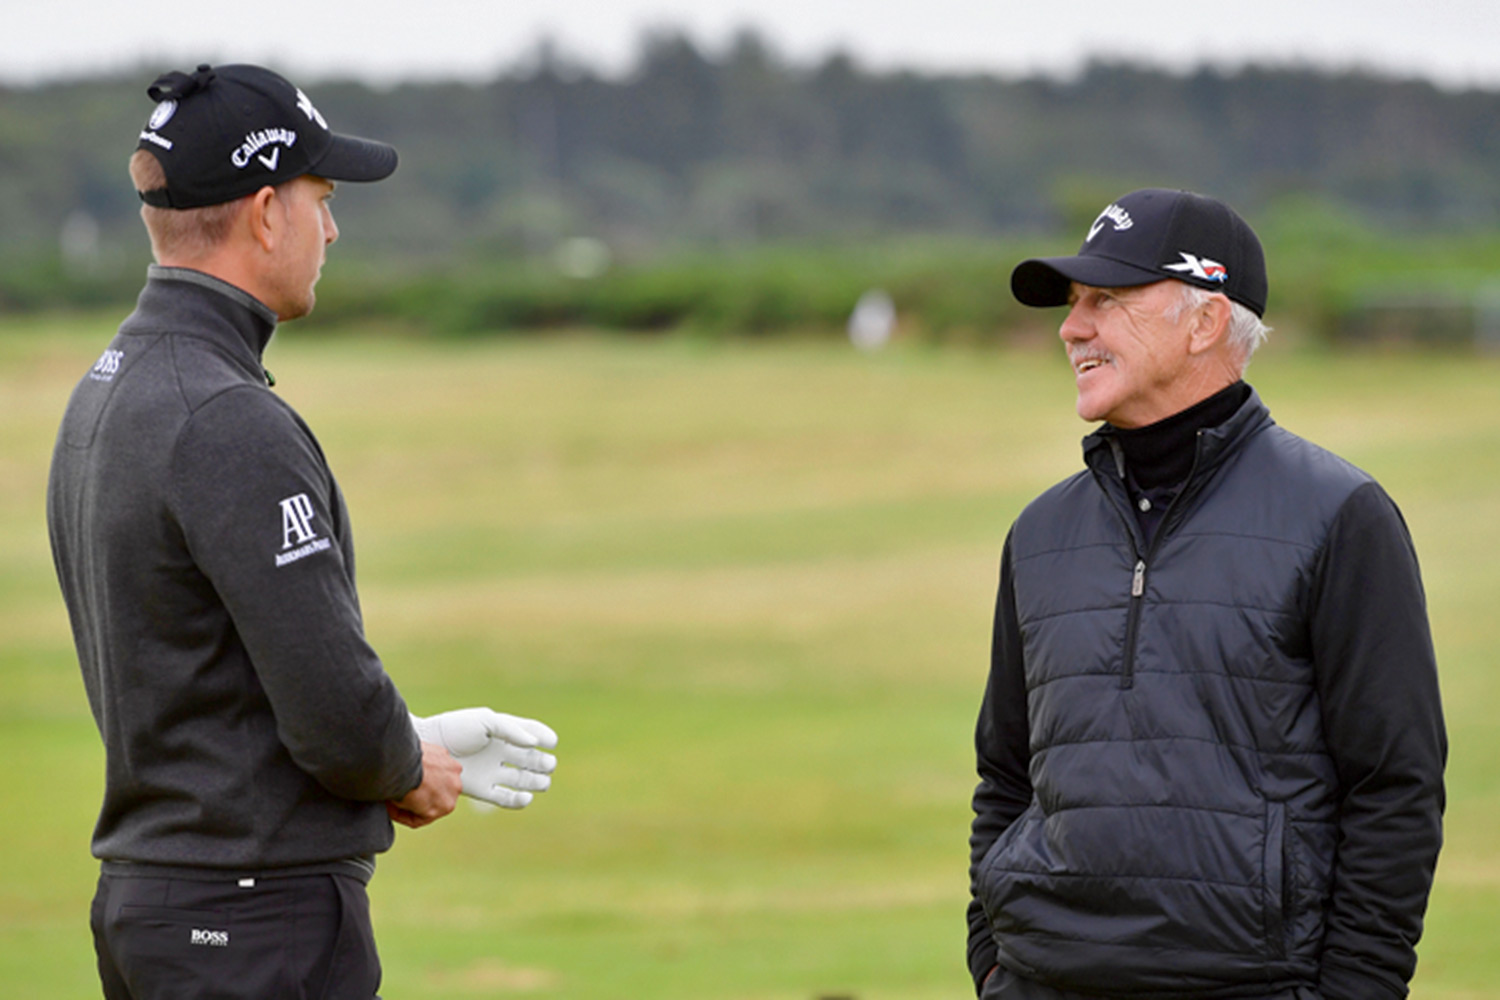 ’On Friday, before Henrik shot 65, he actually said to me, “This is THE week.” He just knew. So did I.’ – Pete Cowen Stenson’s swing coach 